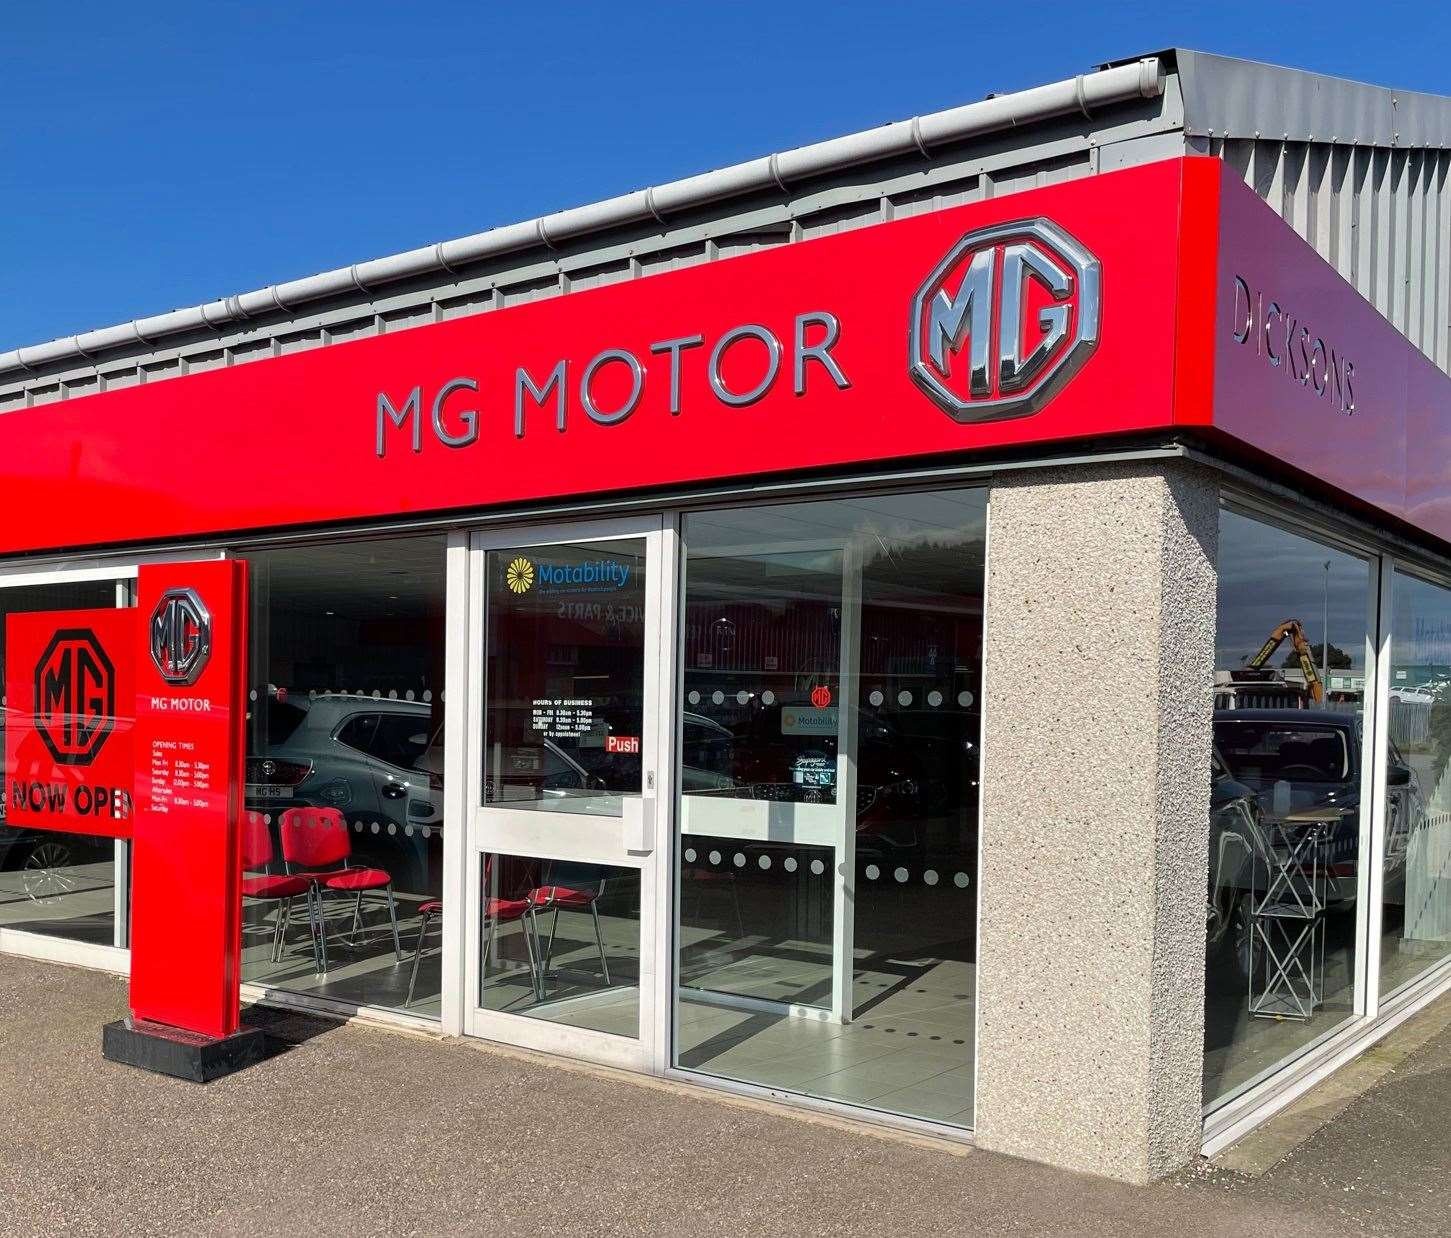 Dickson's new MG showroom in the Carse industrial estate in Inverness.